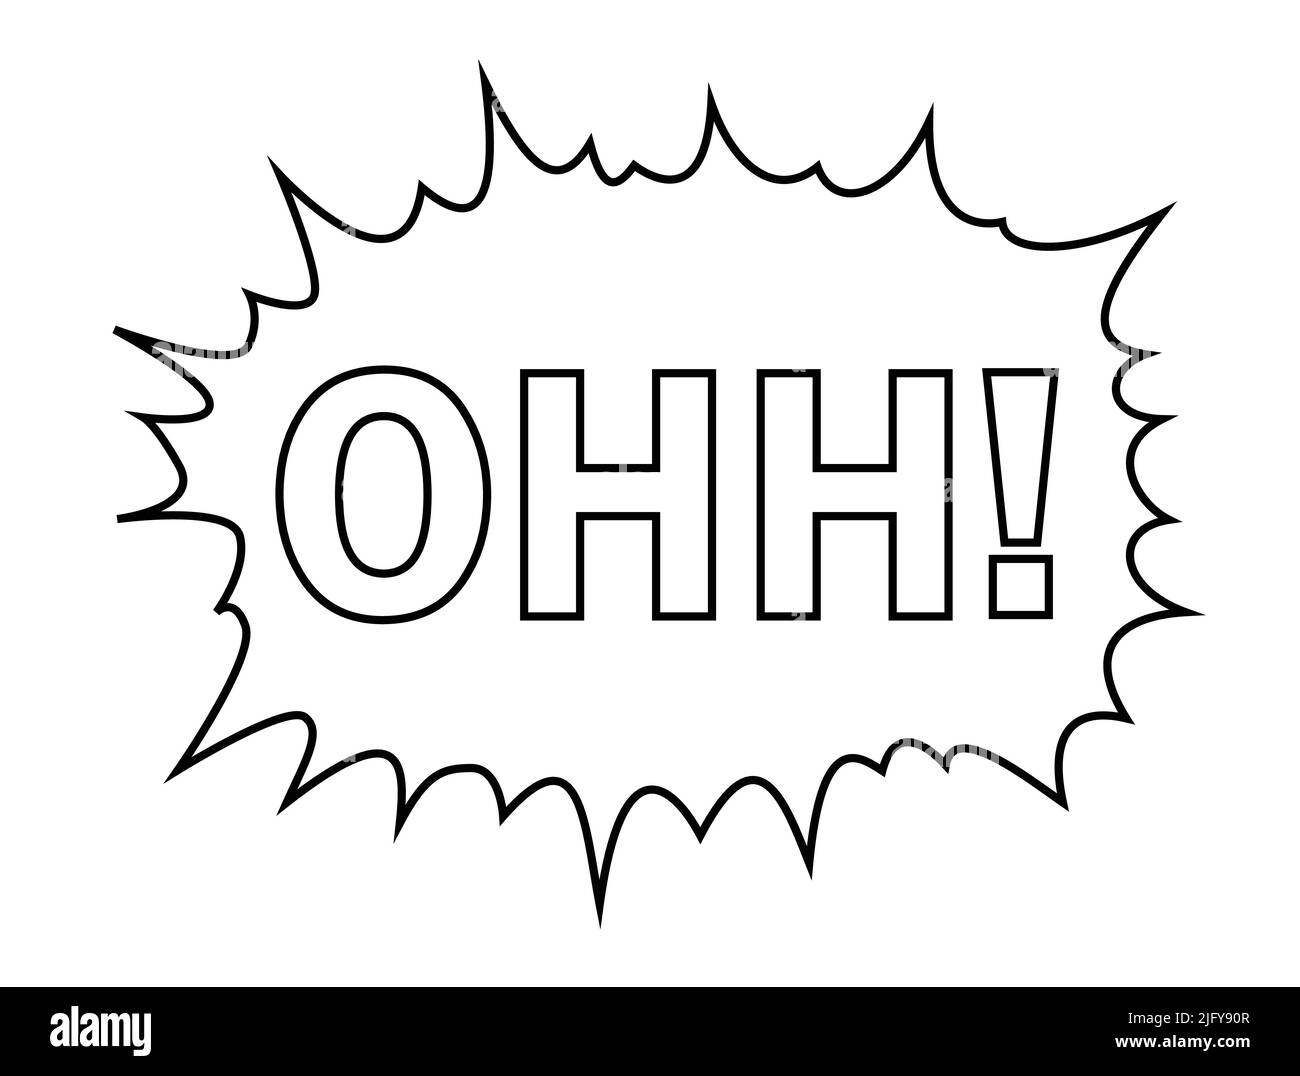 OHH!. text positive motivational words with white background Stock Vector